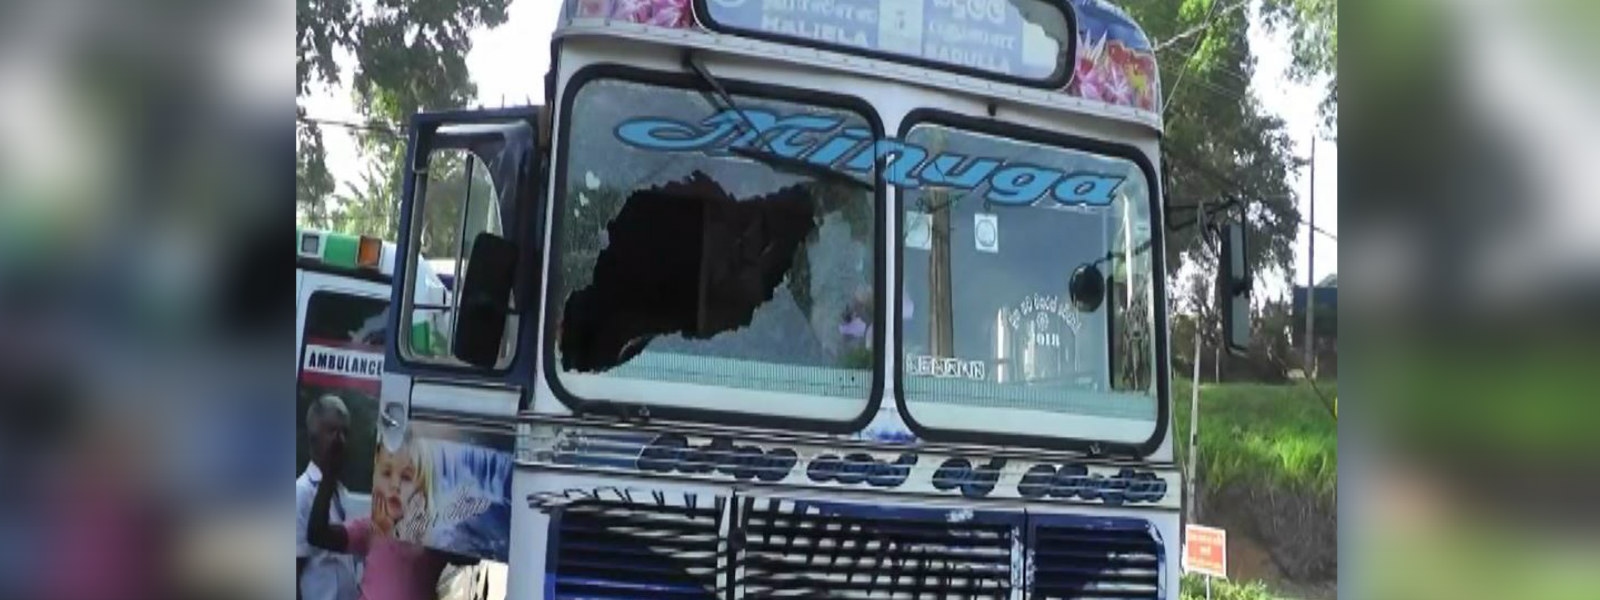 Bus transporting supporters for JO rally attacked 